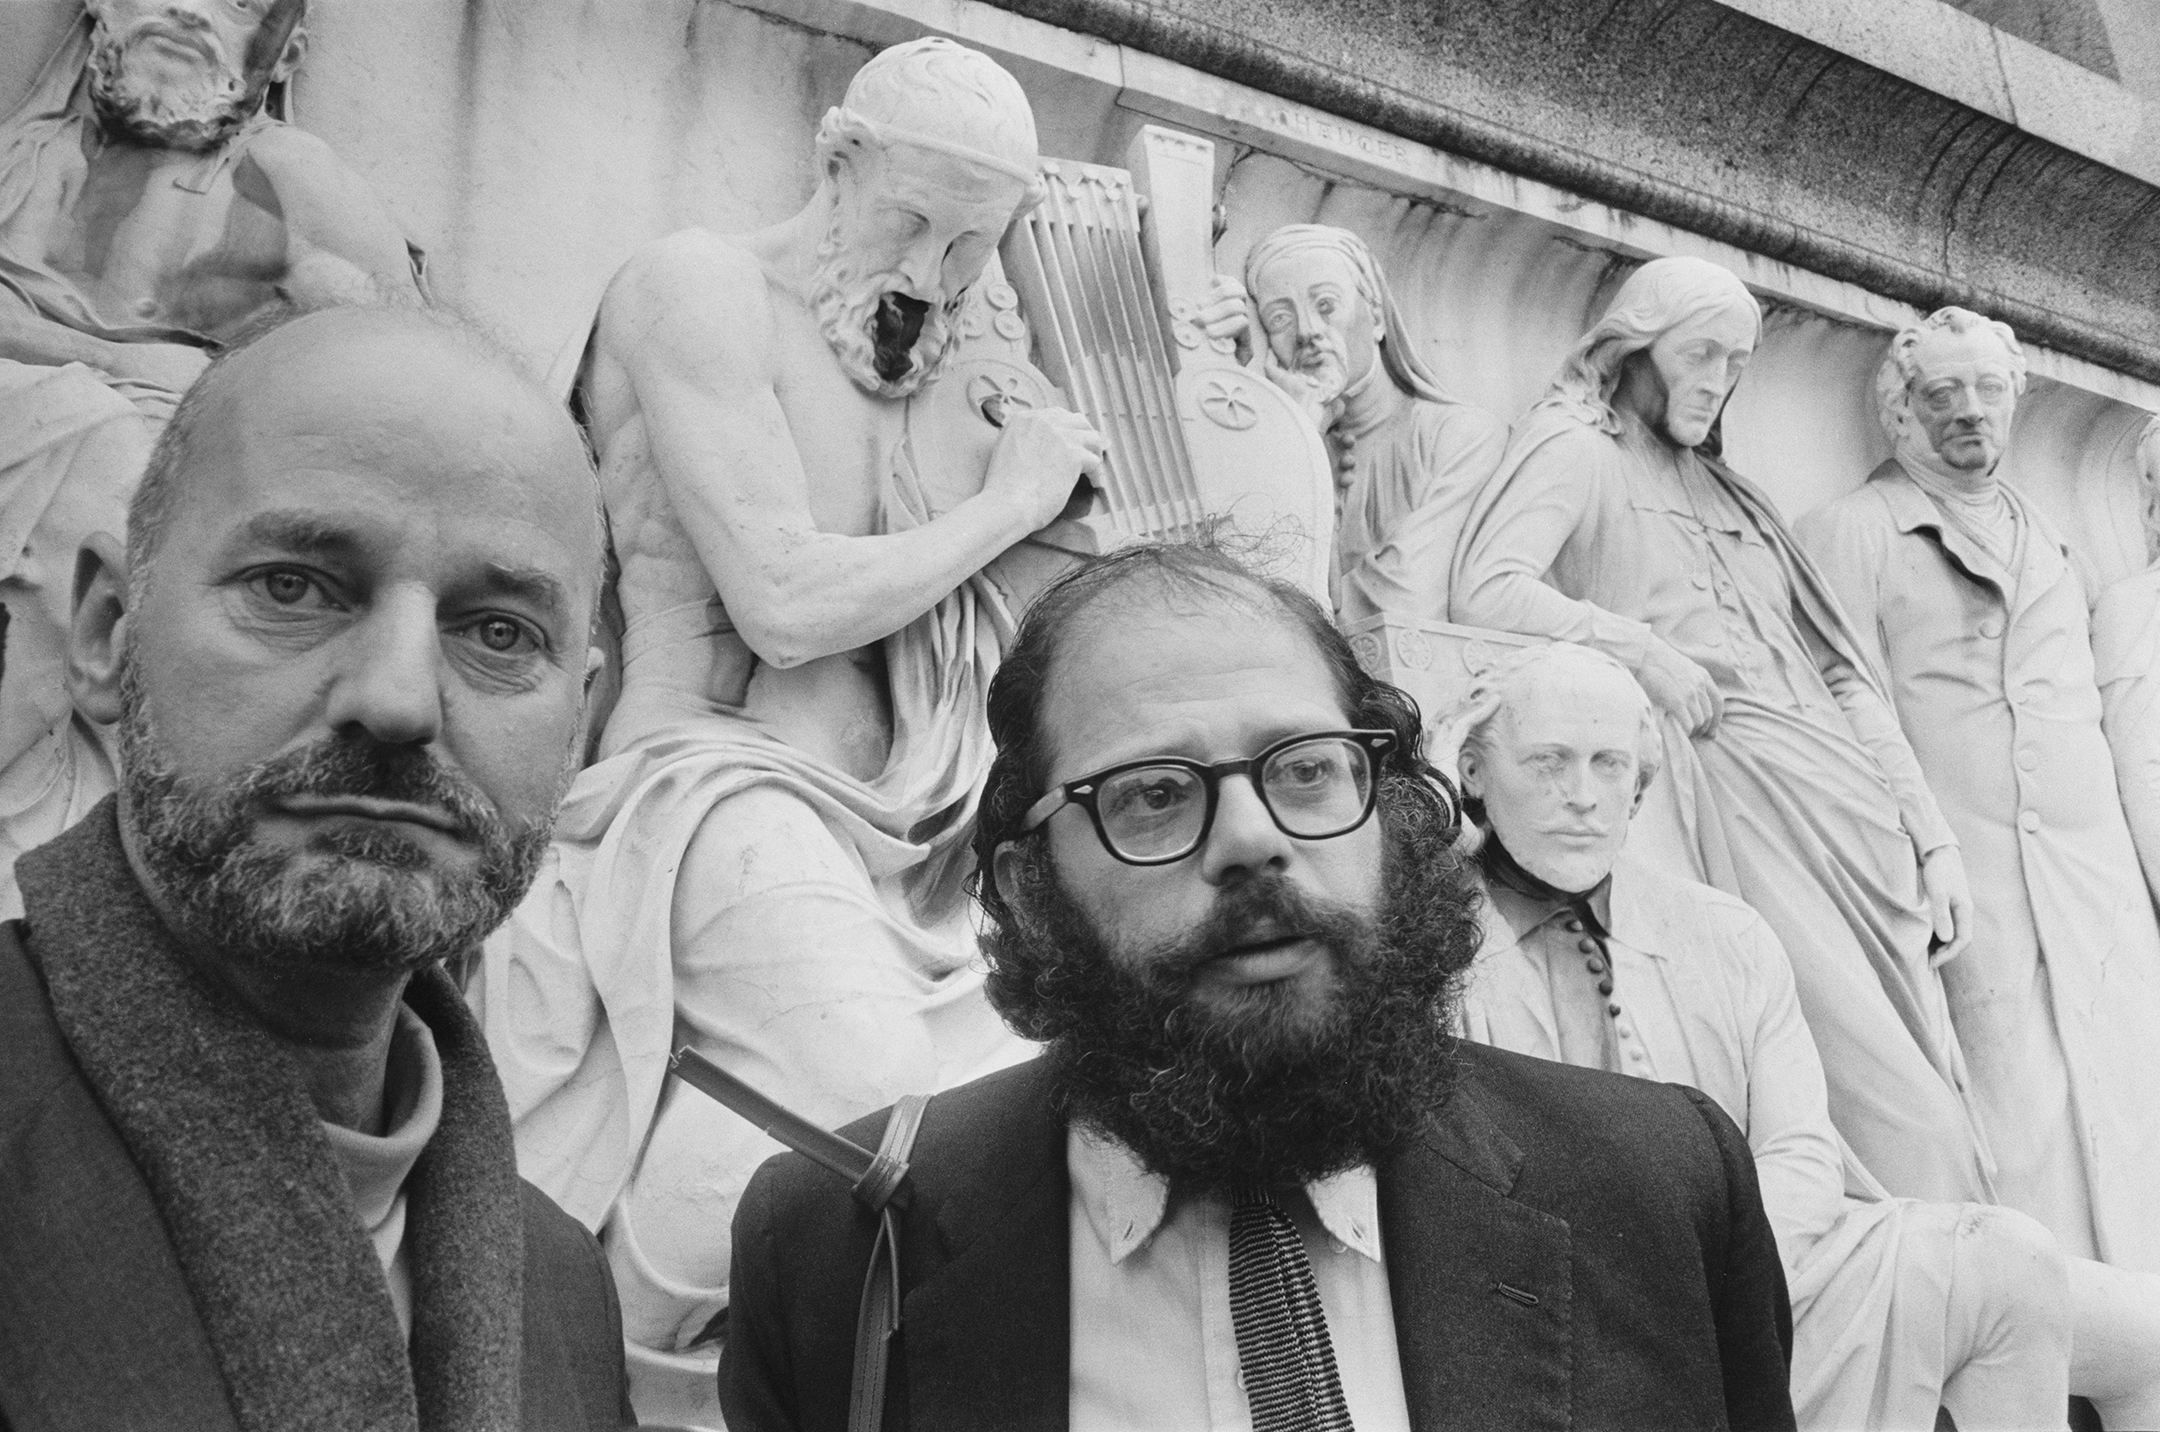 Black and white photo of Lawrence Ferlinghetti and Allen Ginsberg standing in front of a frieze, with Ferlinghetti looking at the camera and Ginsberg looking slightly to his left